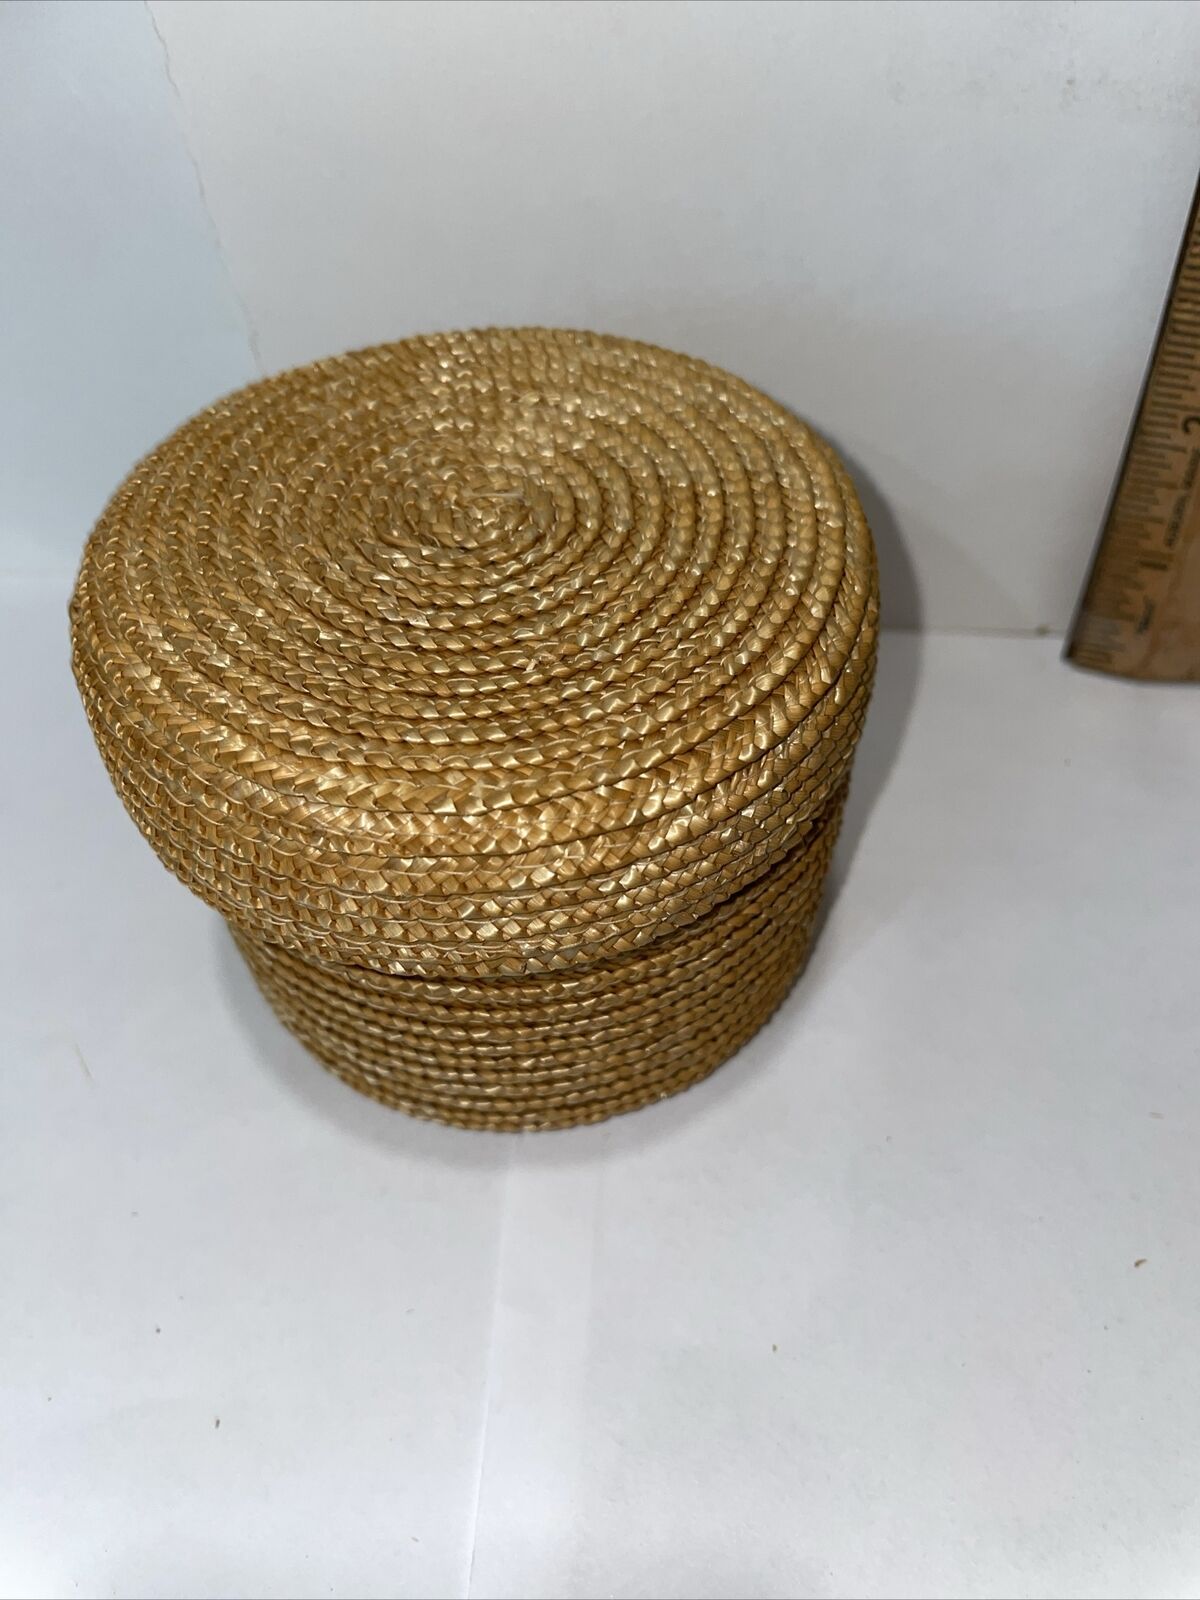 Vintager Pine Needle Mini Basket with Wicker Inside Layer Lid 3x3 Inch